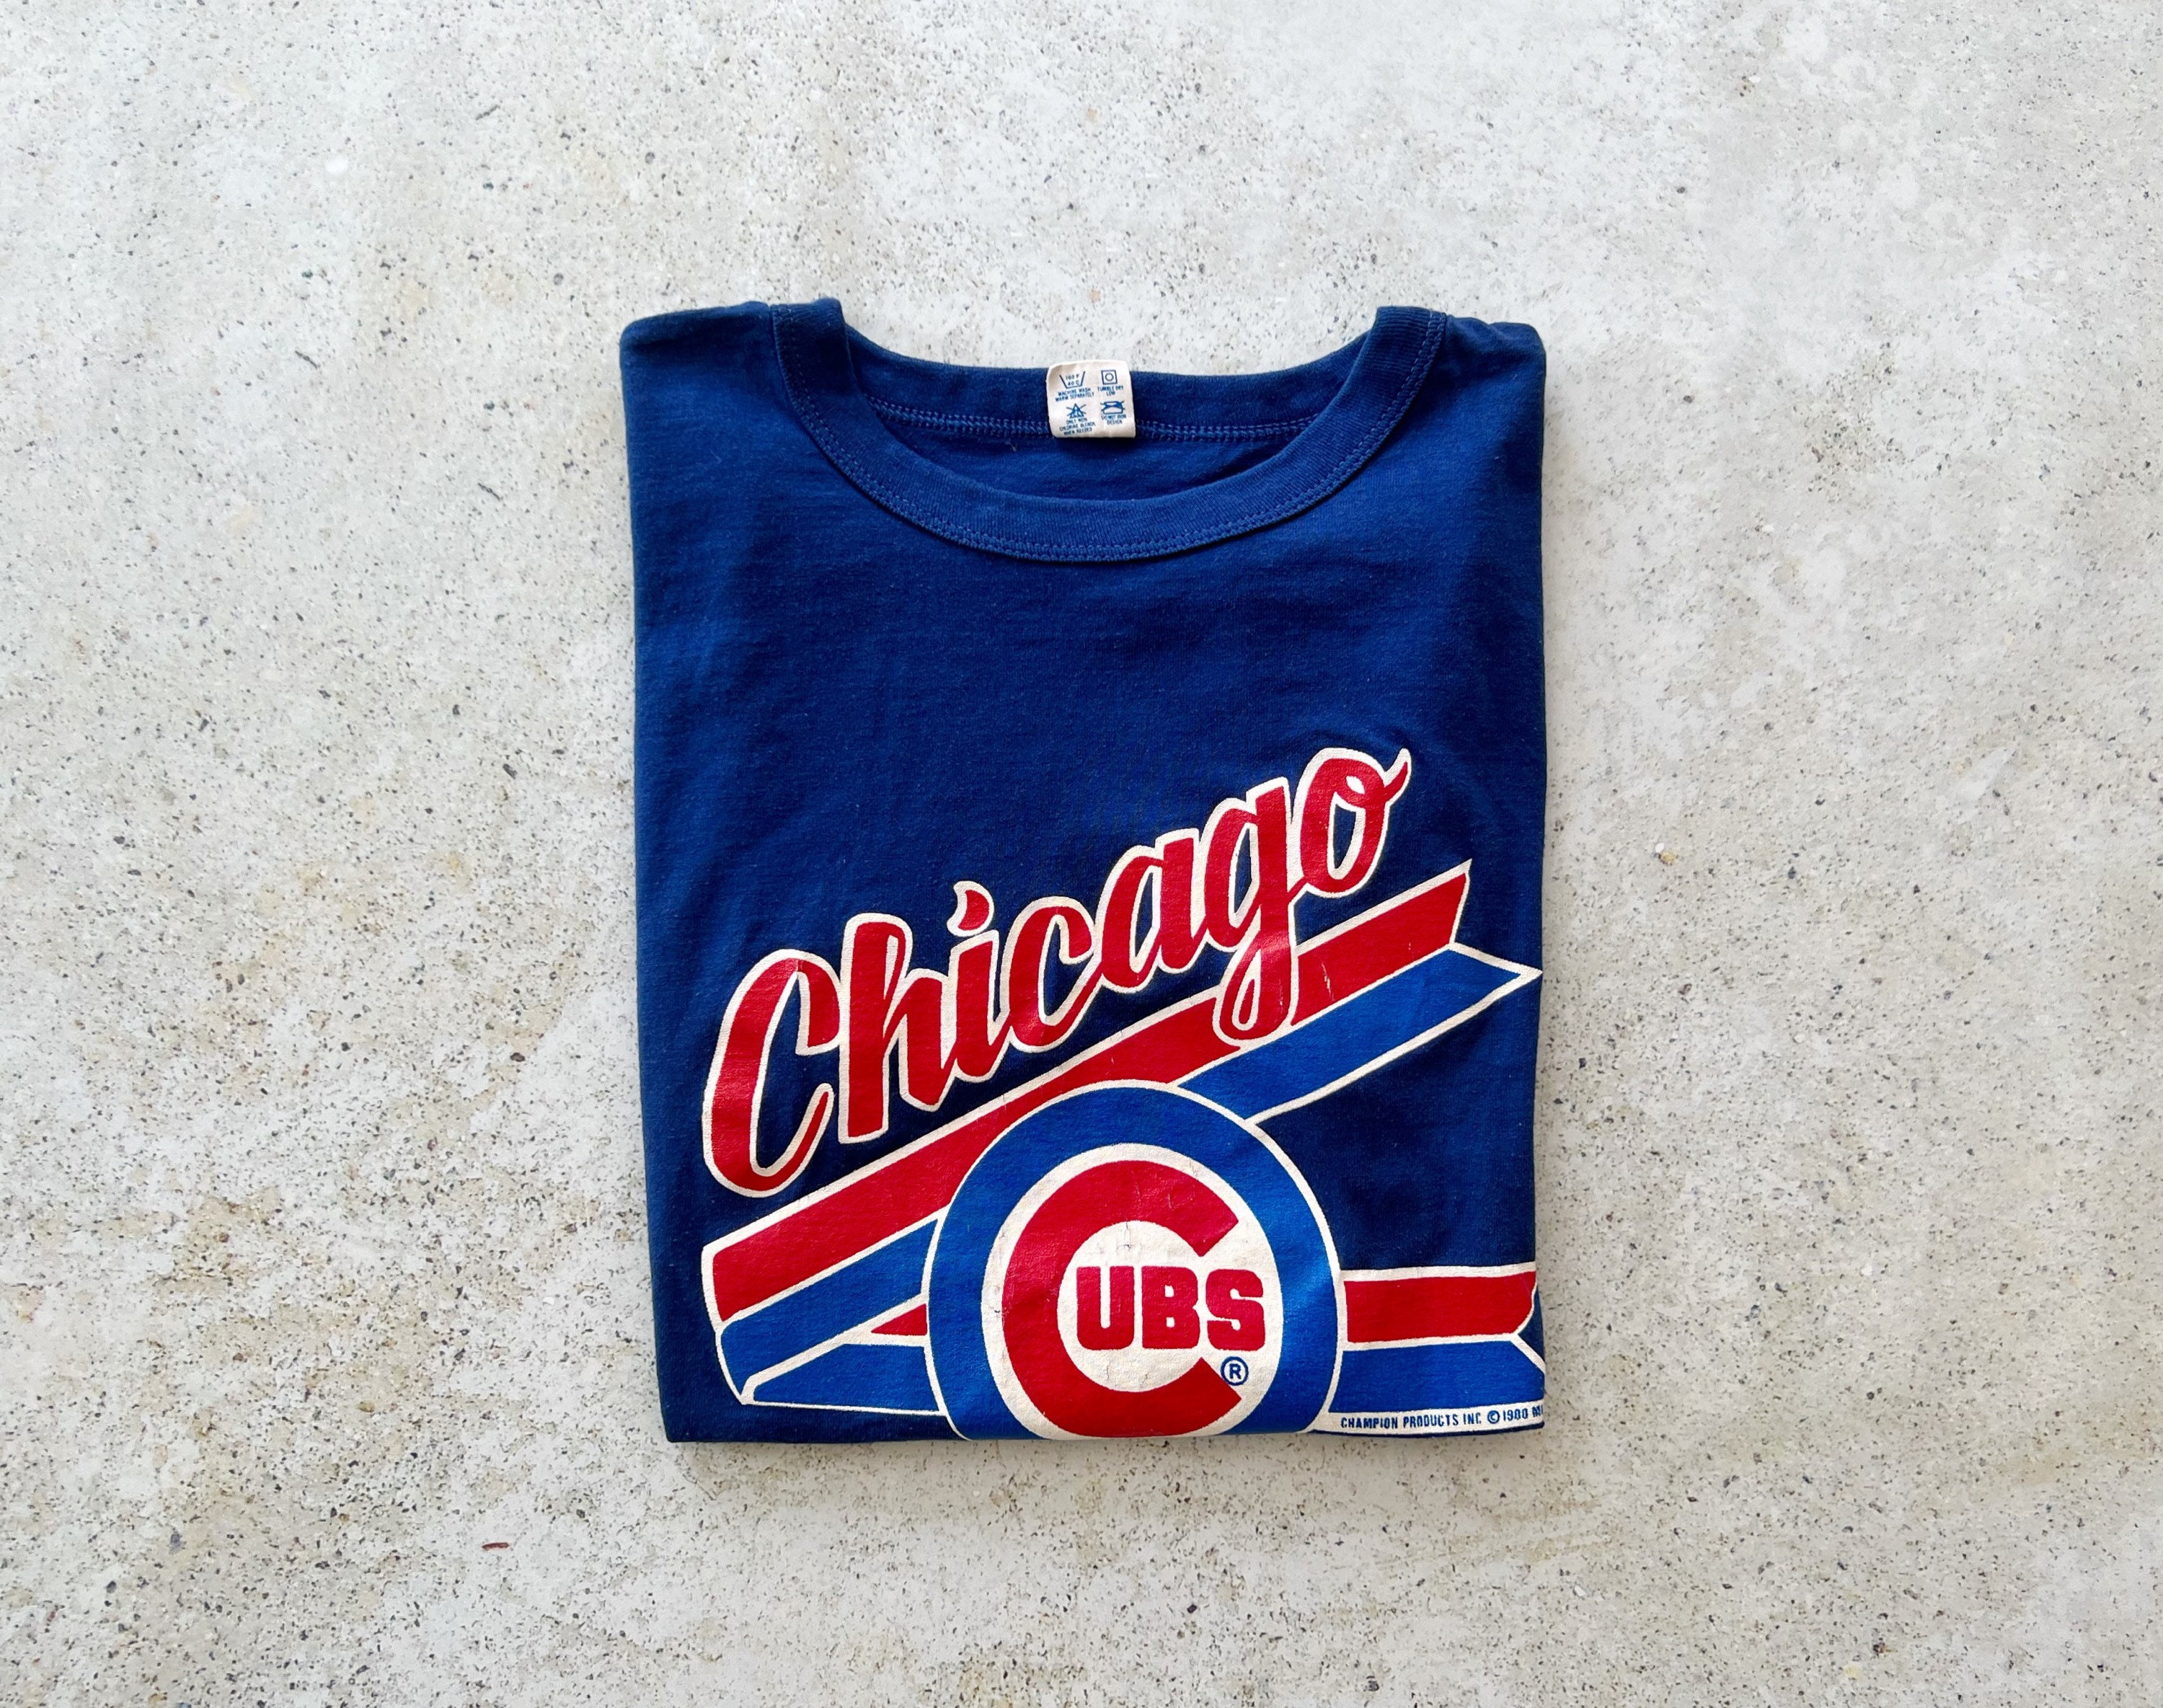 BrooklynThread Vintage T-Shirt | Chicago Cubs Baseball Sports Illinois Graphic Tee Top Shirt Pullover Streetwear Blue Red 80's | Size M